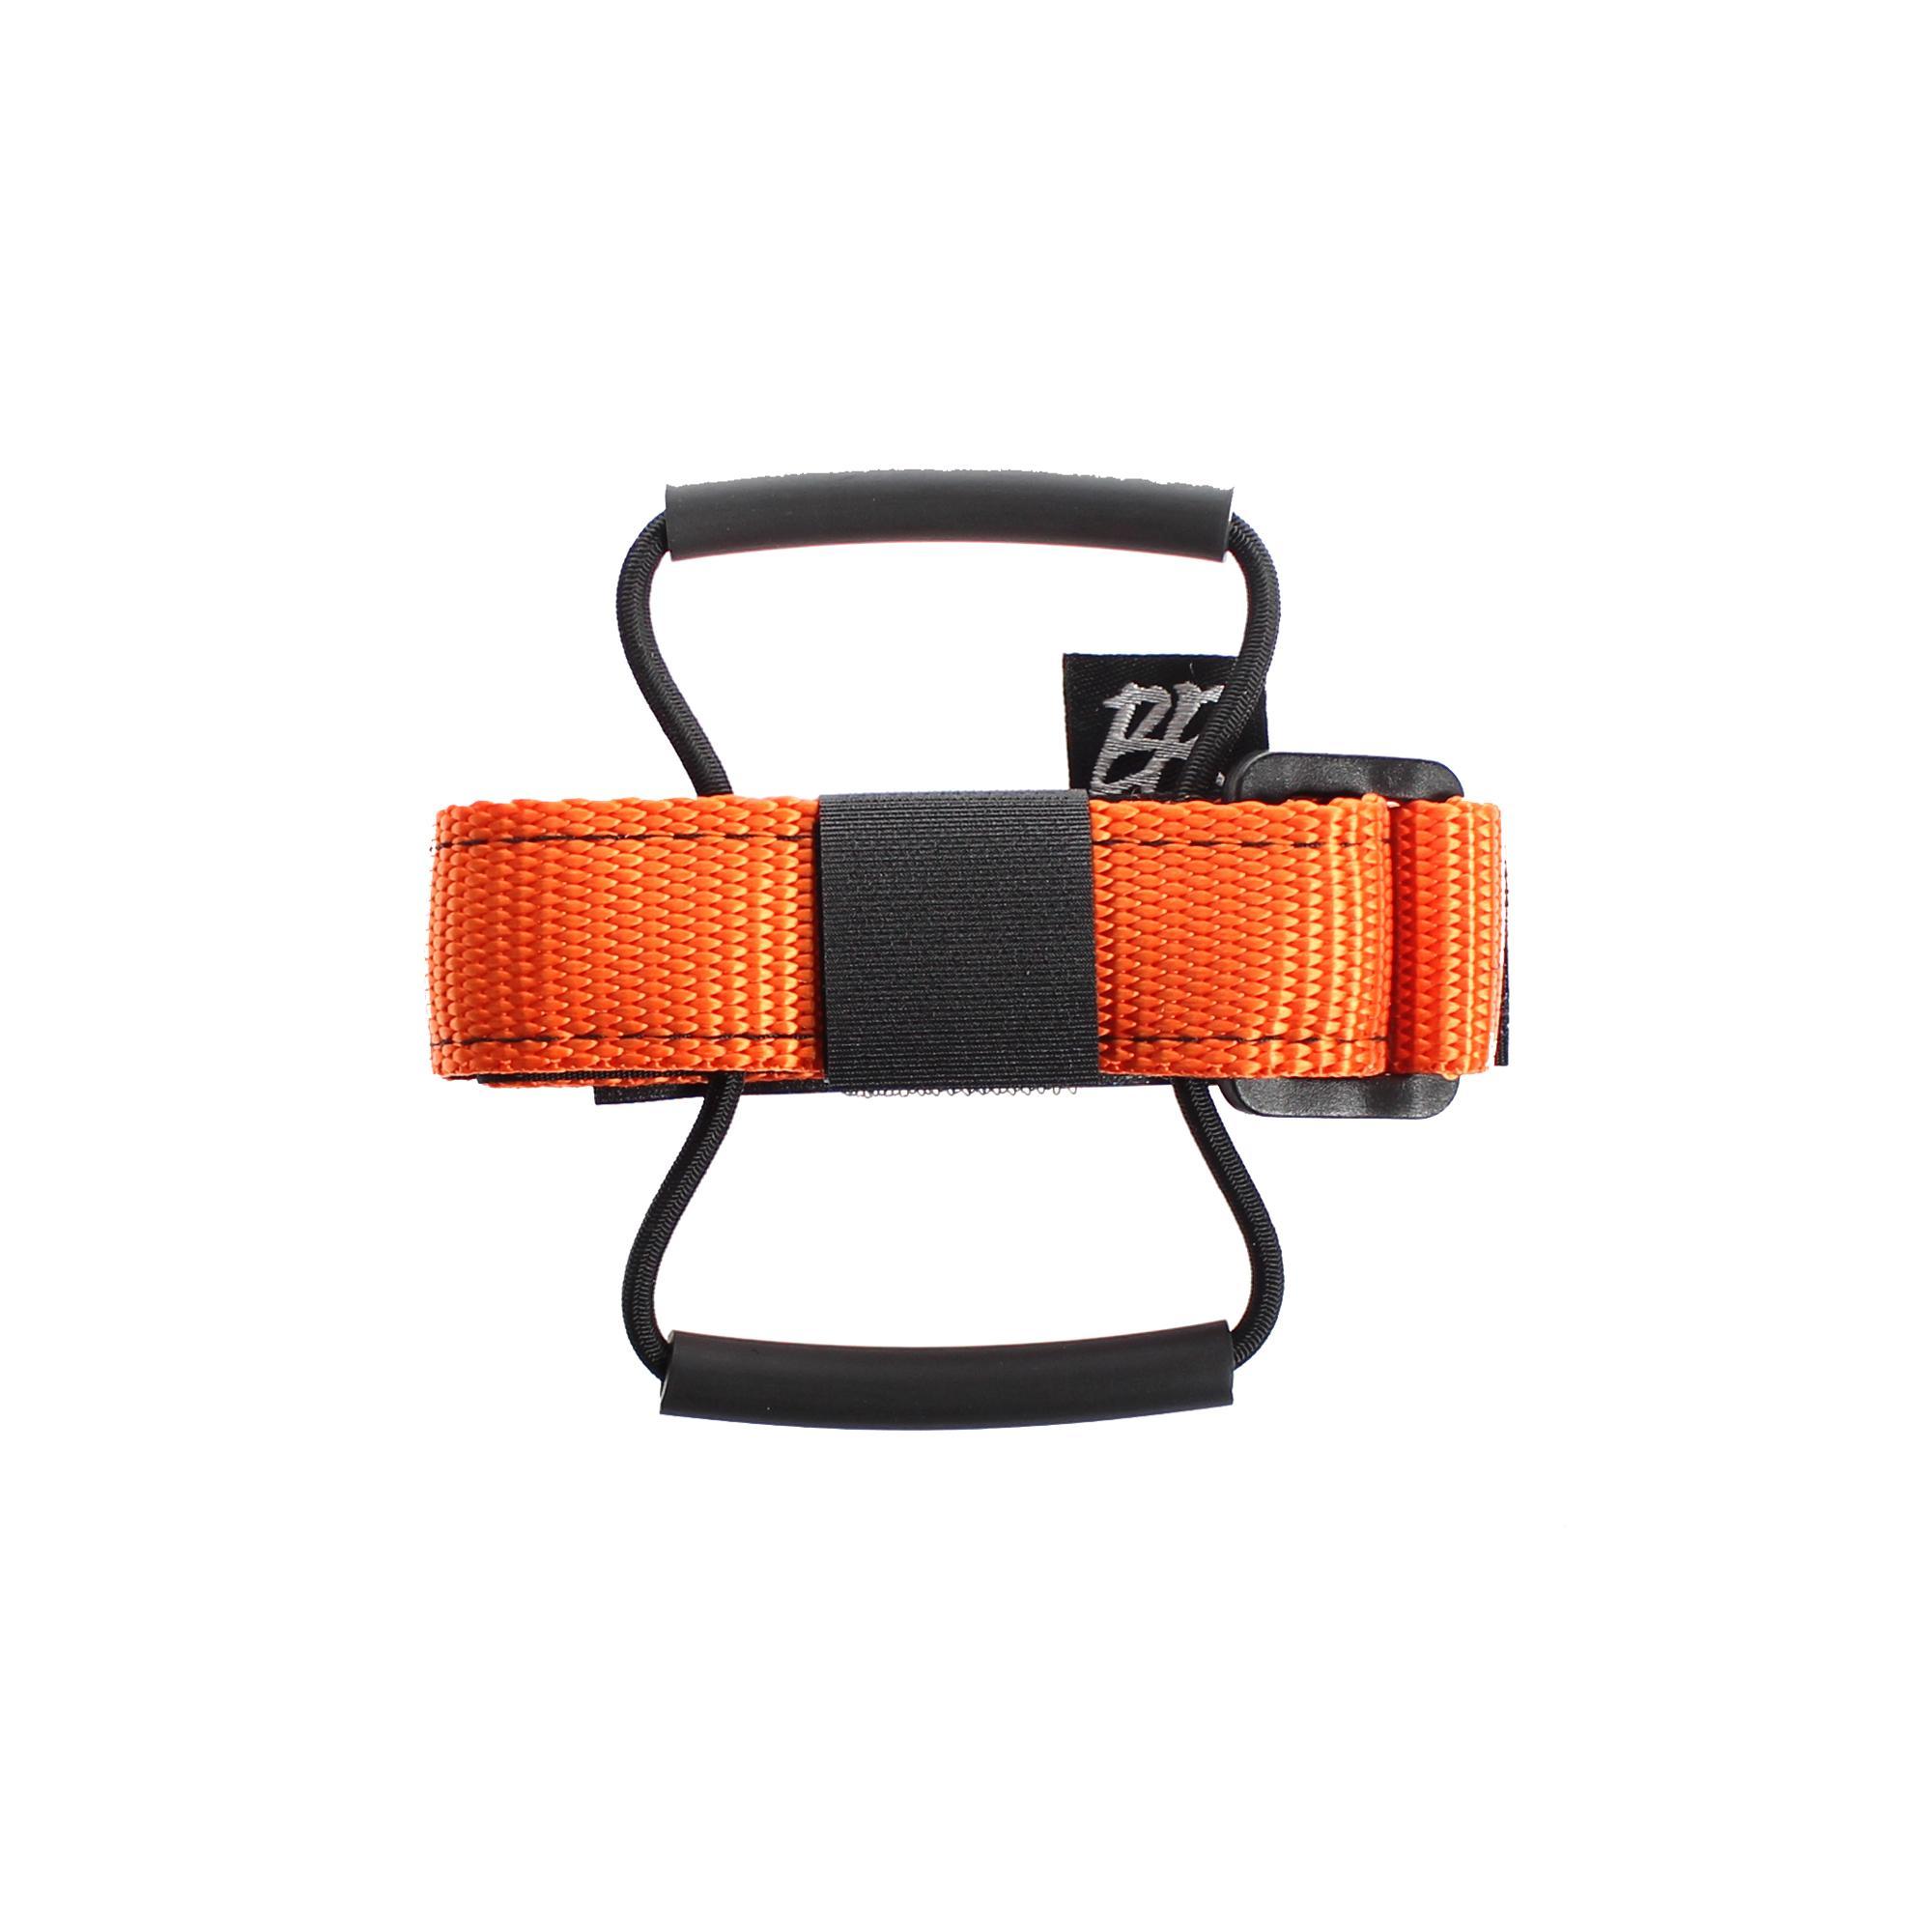 Back country research race strap for mtb frames orange in colour